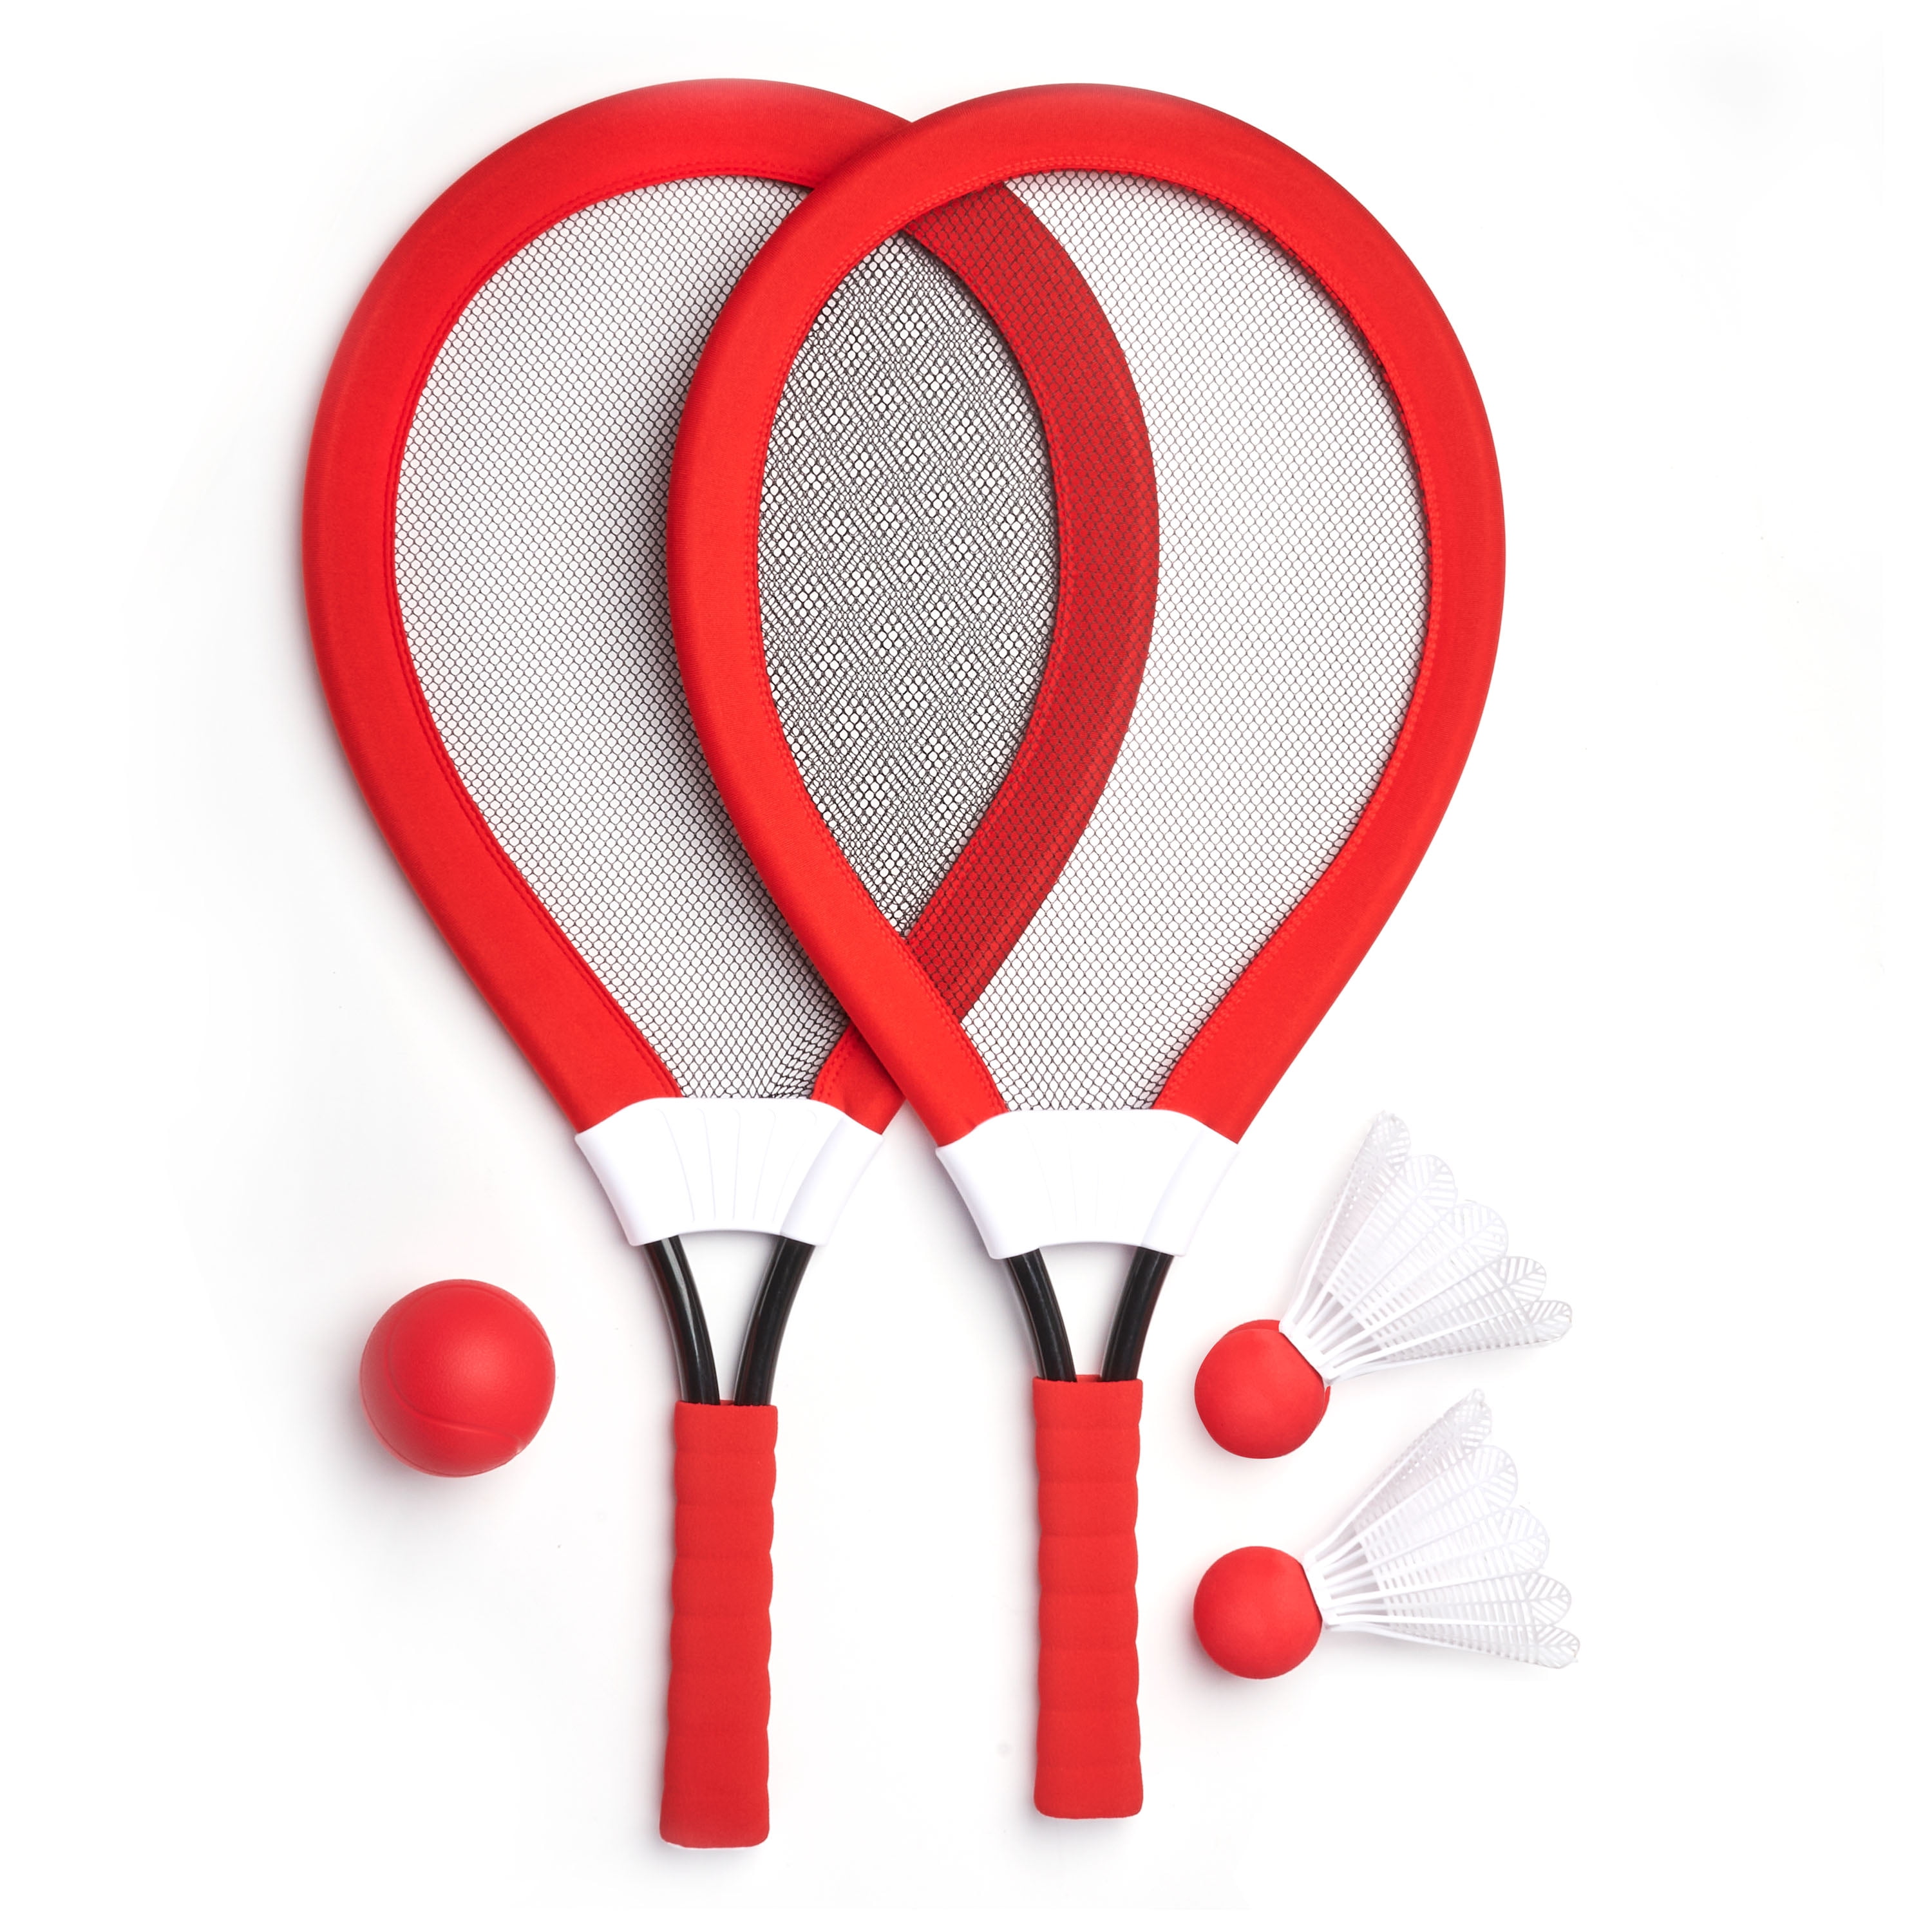 PACK of 2 Jumbo Soft Tennis Set With Soft Ball and Badminton Shuttlecock 